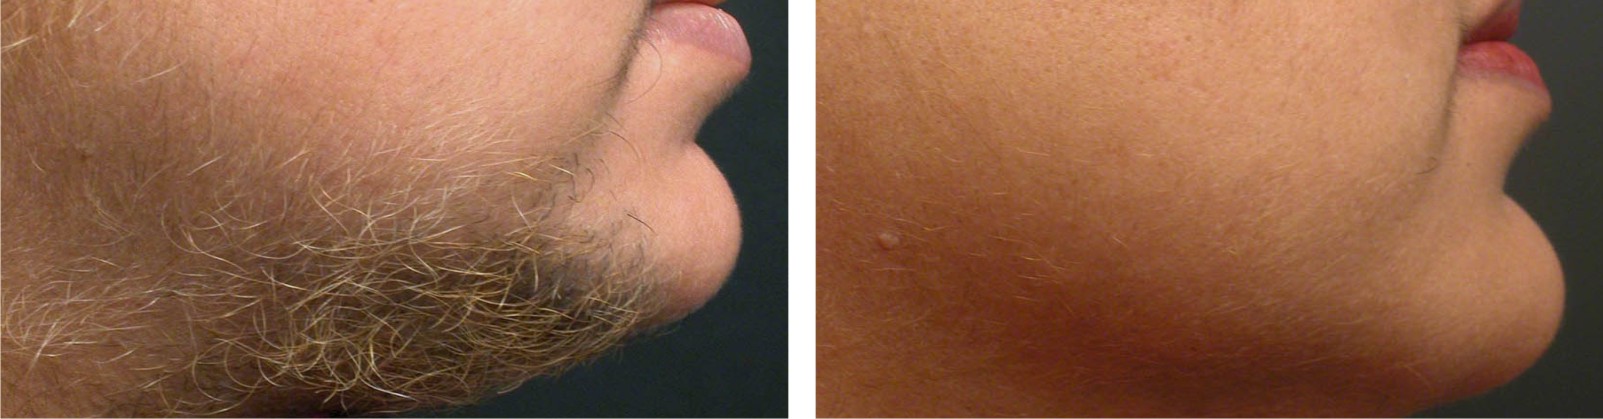 Painless Laser Hair Removal Image One